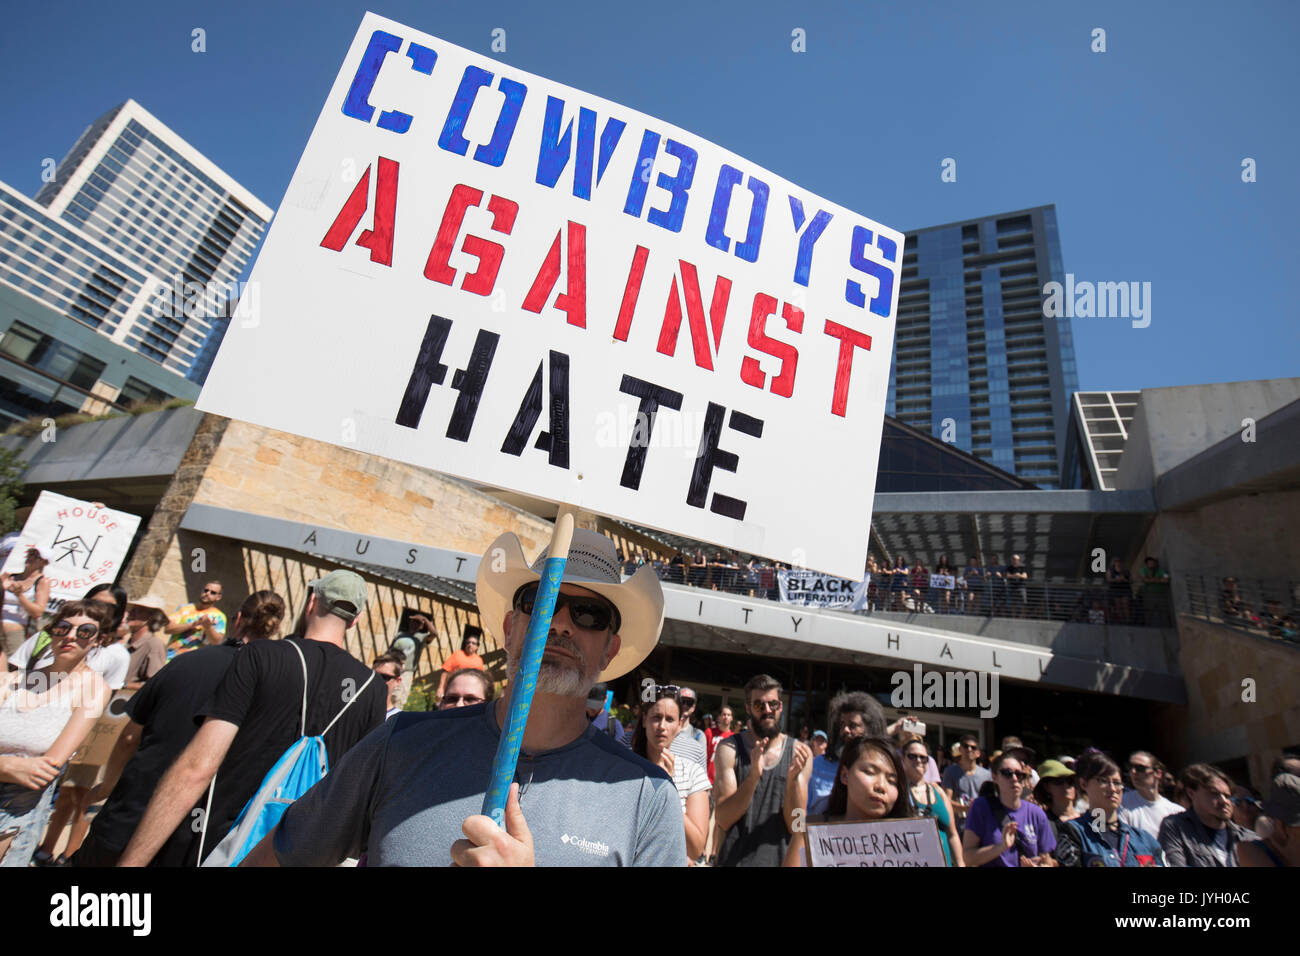 Activists and protesters converge on City Hall for a hot two-hour rally against racism and President Donald Trump's apparent insensitive comments about recent Charlottesville violence that left one dead. About 1,000 gathered in Saturday's Texas heat. Stock Photo